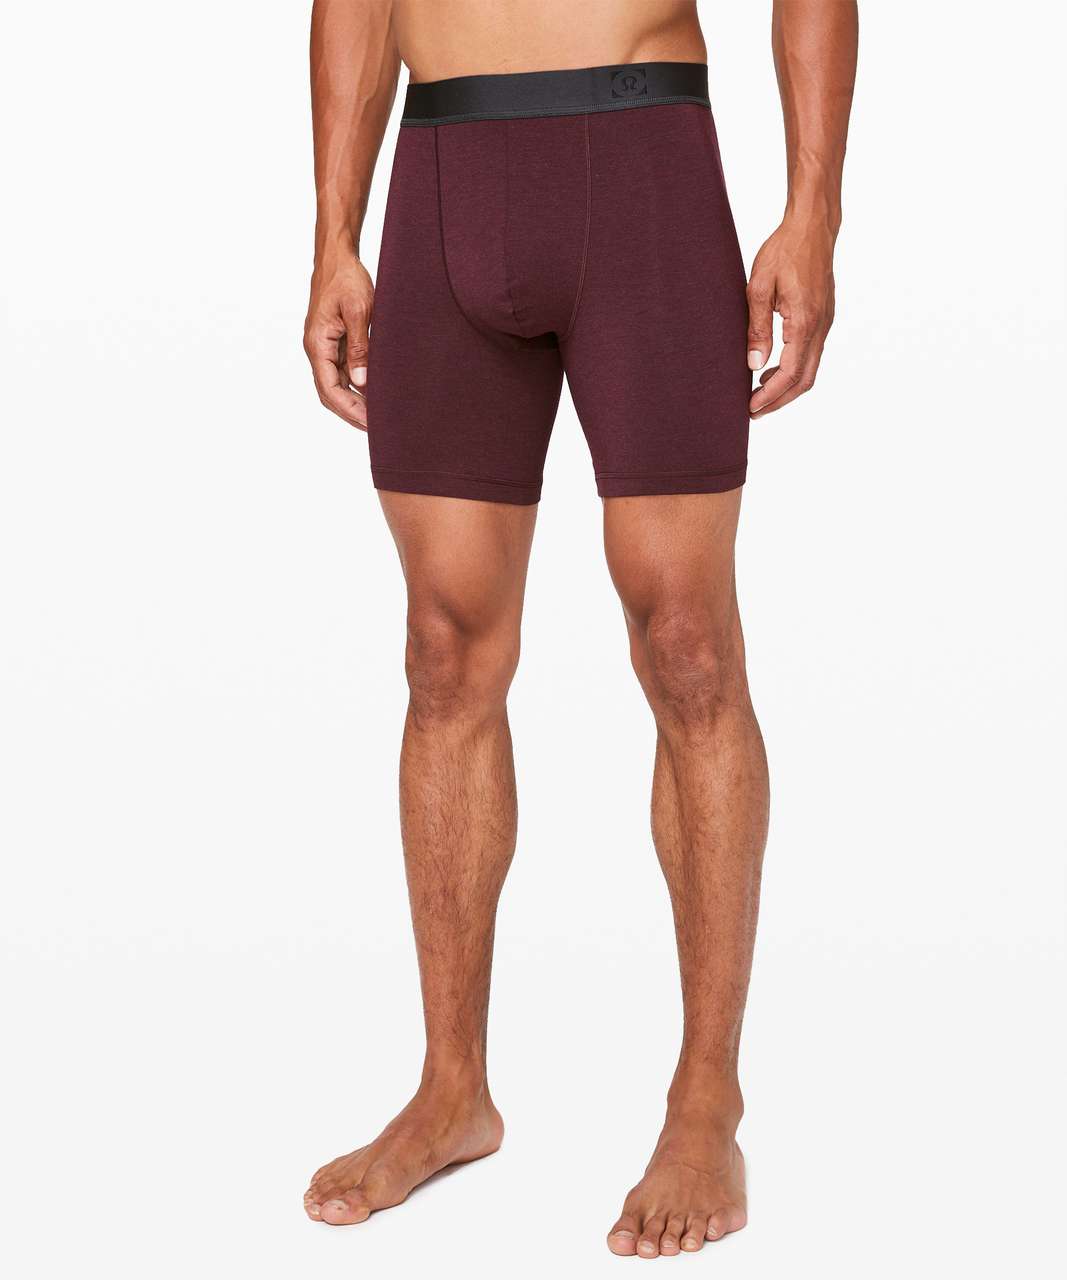 Lululemon Always In Motion Boxer *The Long One 7" - Heathered Maroon